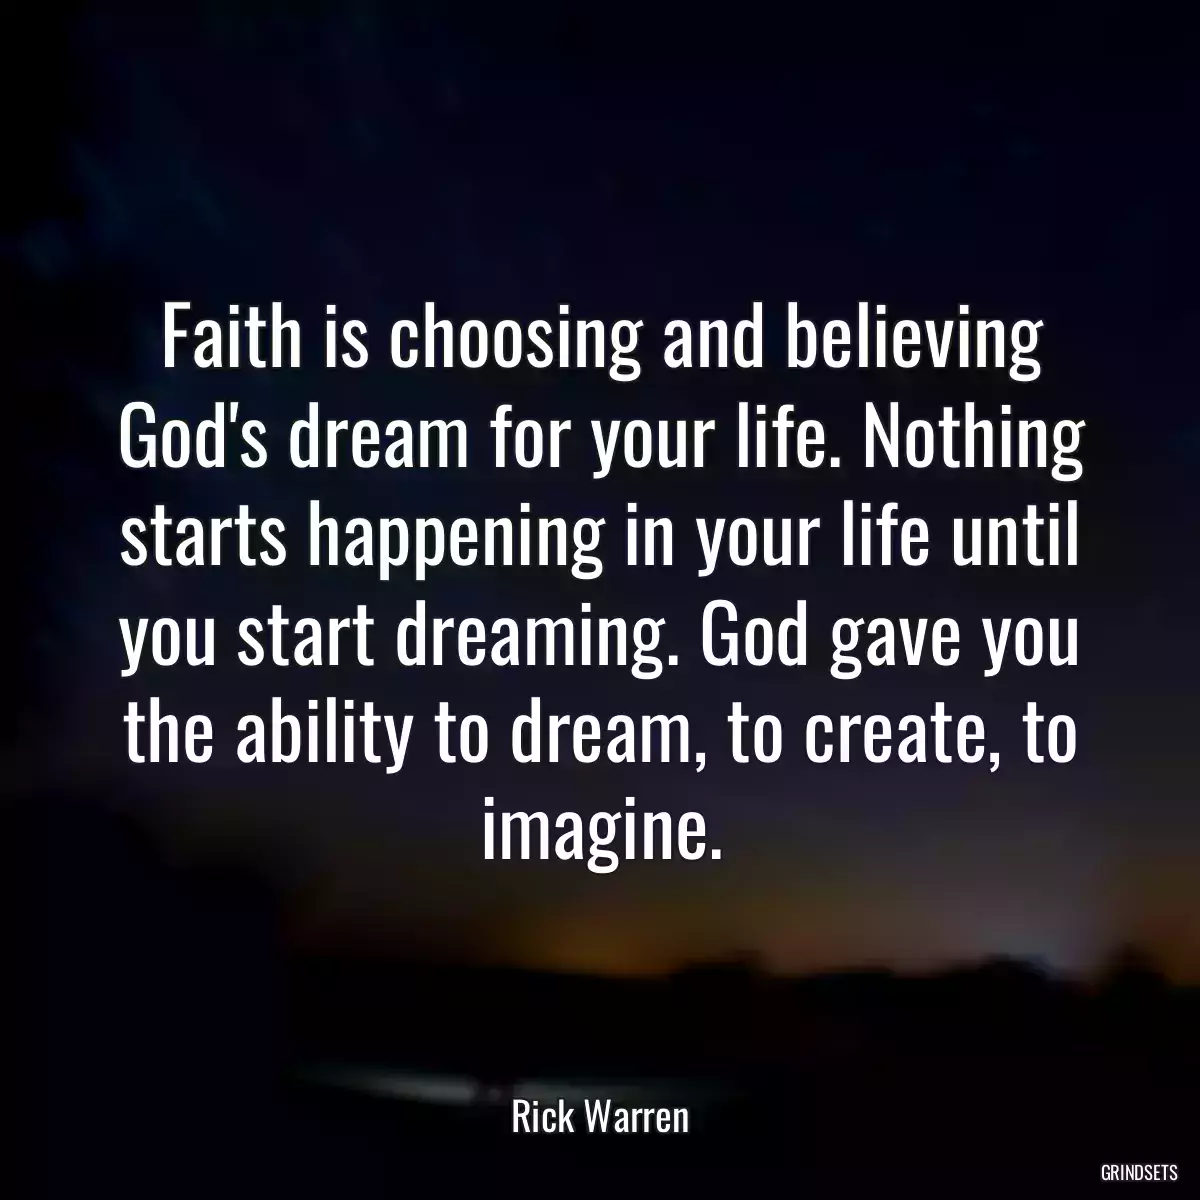 Faith is choosing and believing God\'s dream for your life. Nothing starts happening in your life until you start dreaming. God gave you the ability to dream, to create, to imagine.